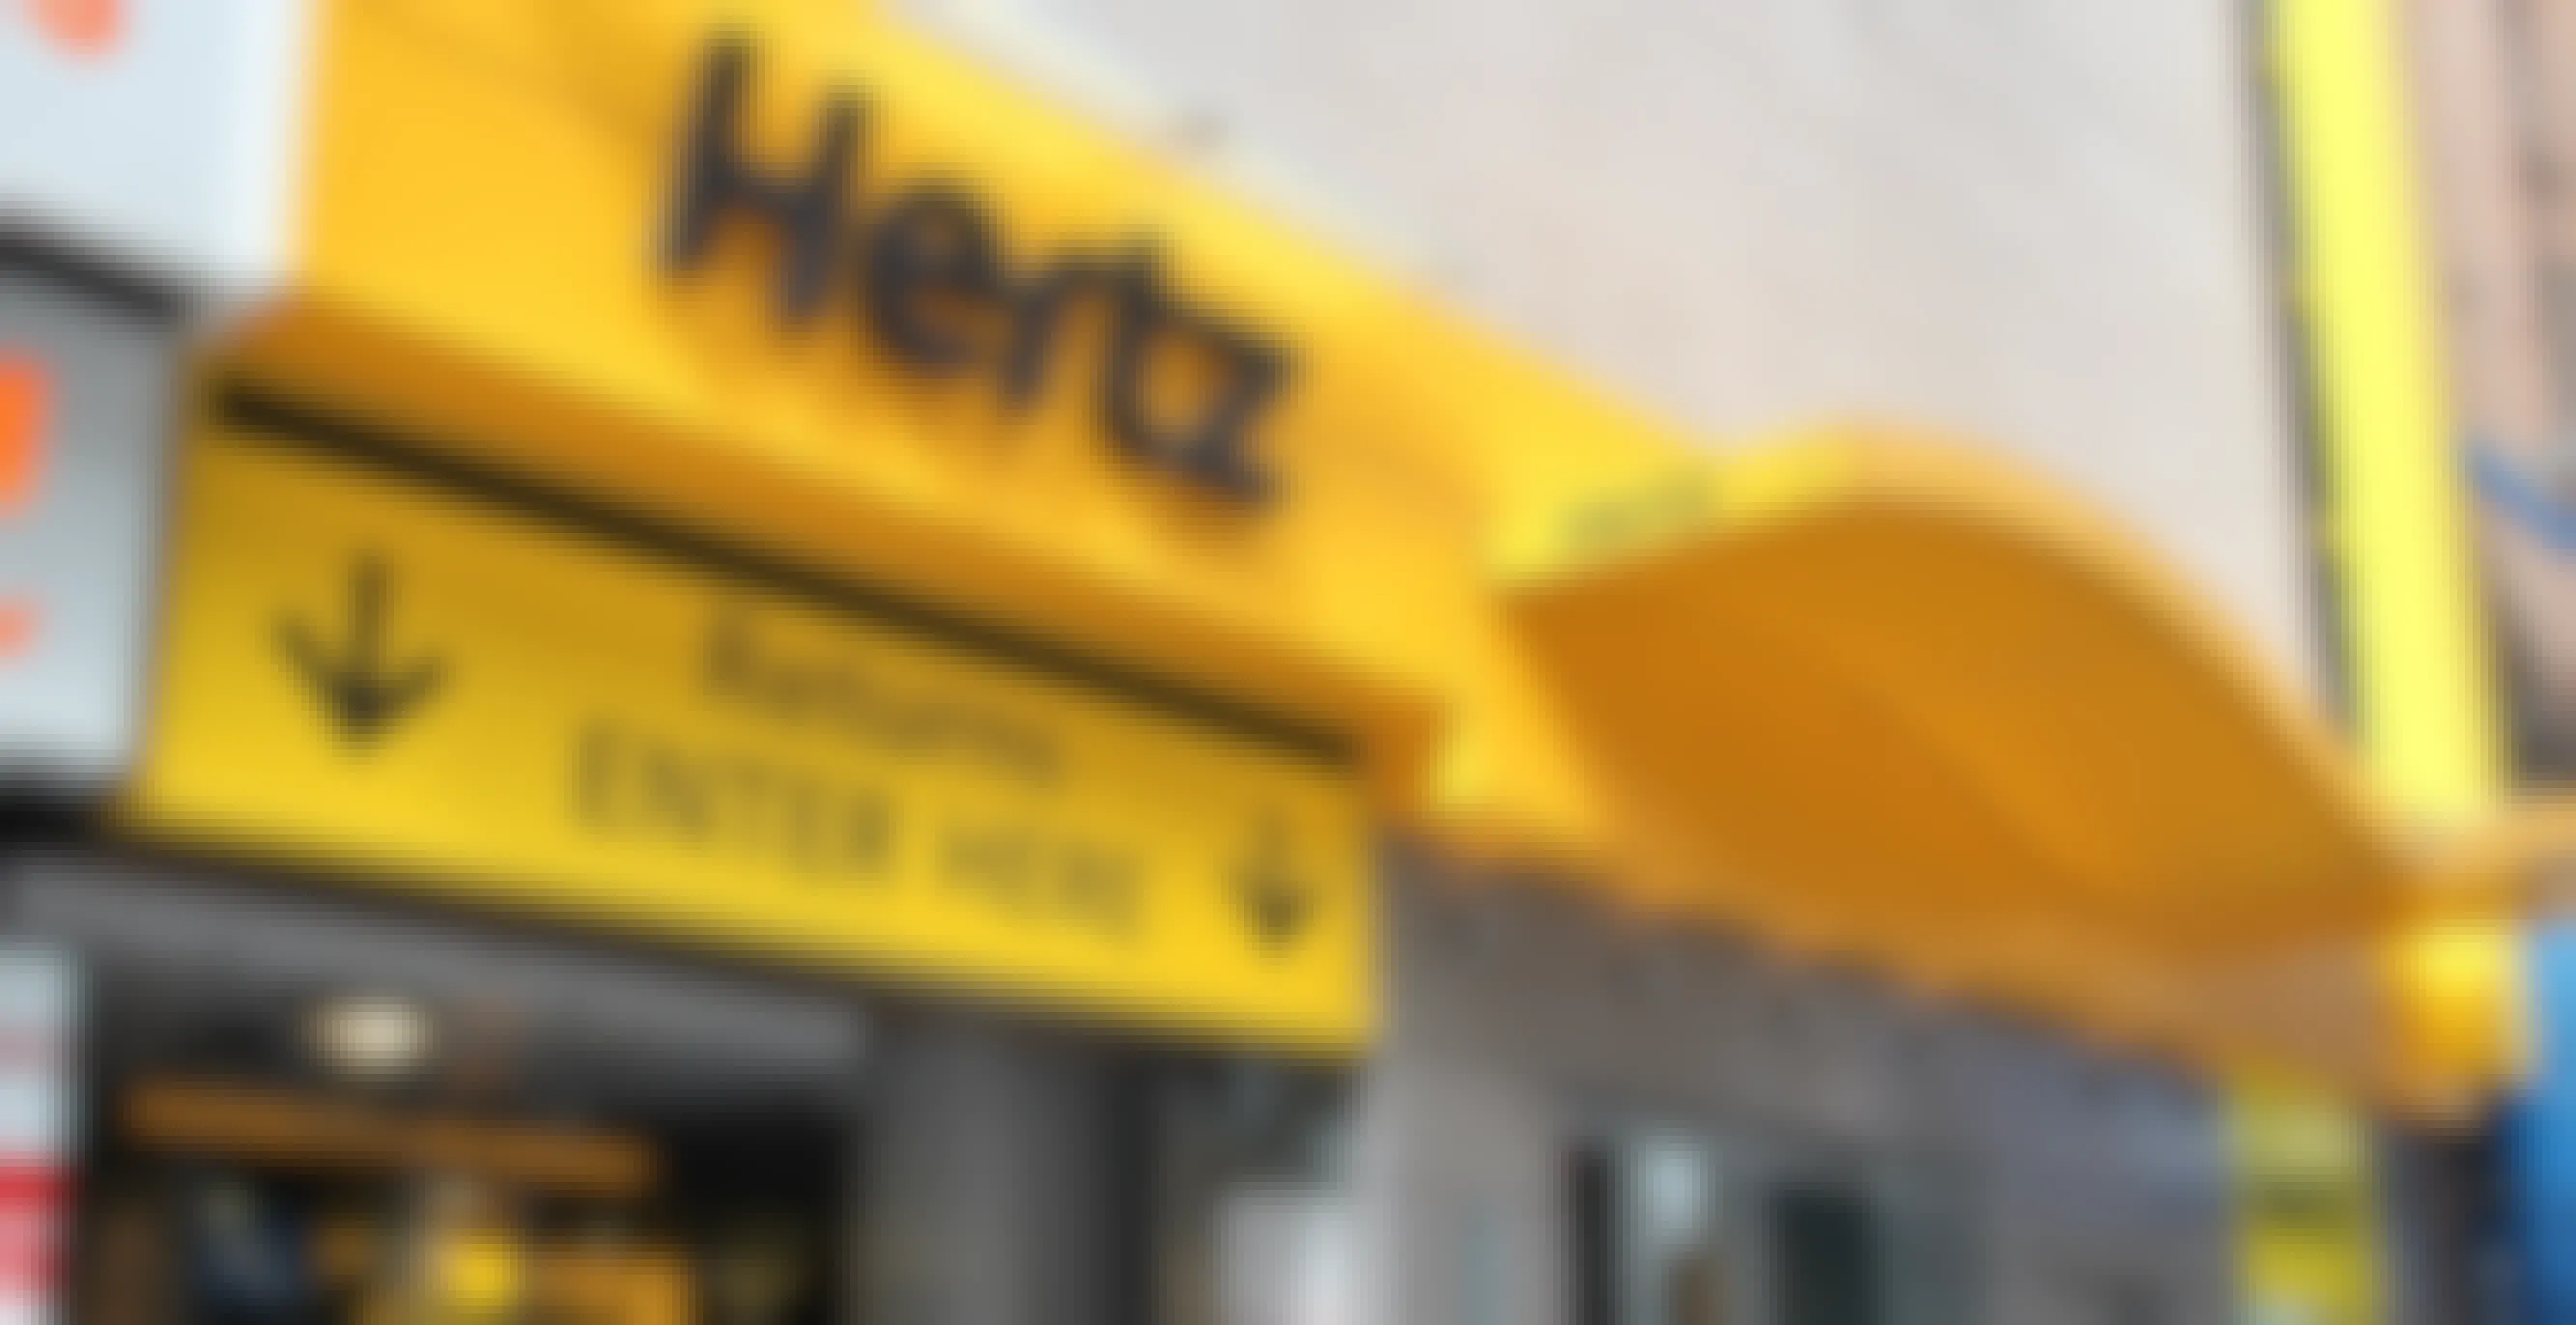 How to Optimize Hertz Military Discount on Used & Rental Cars